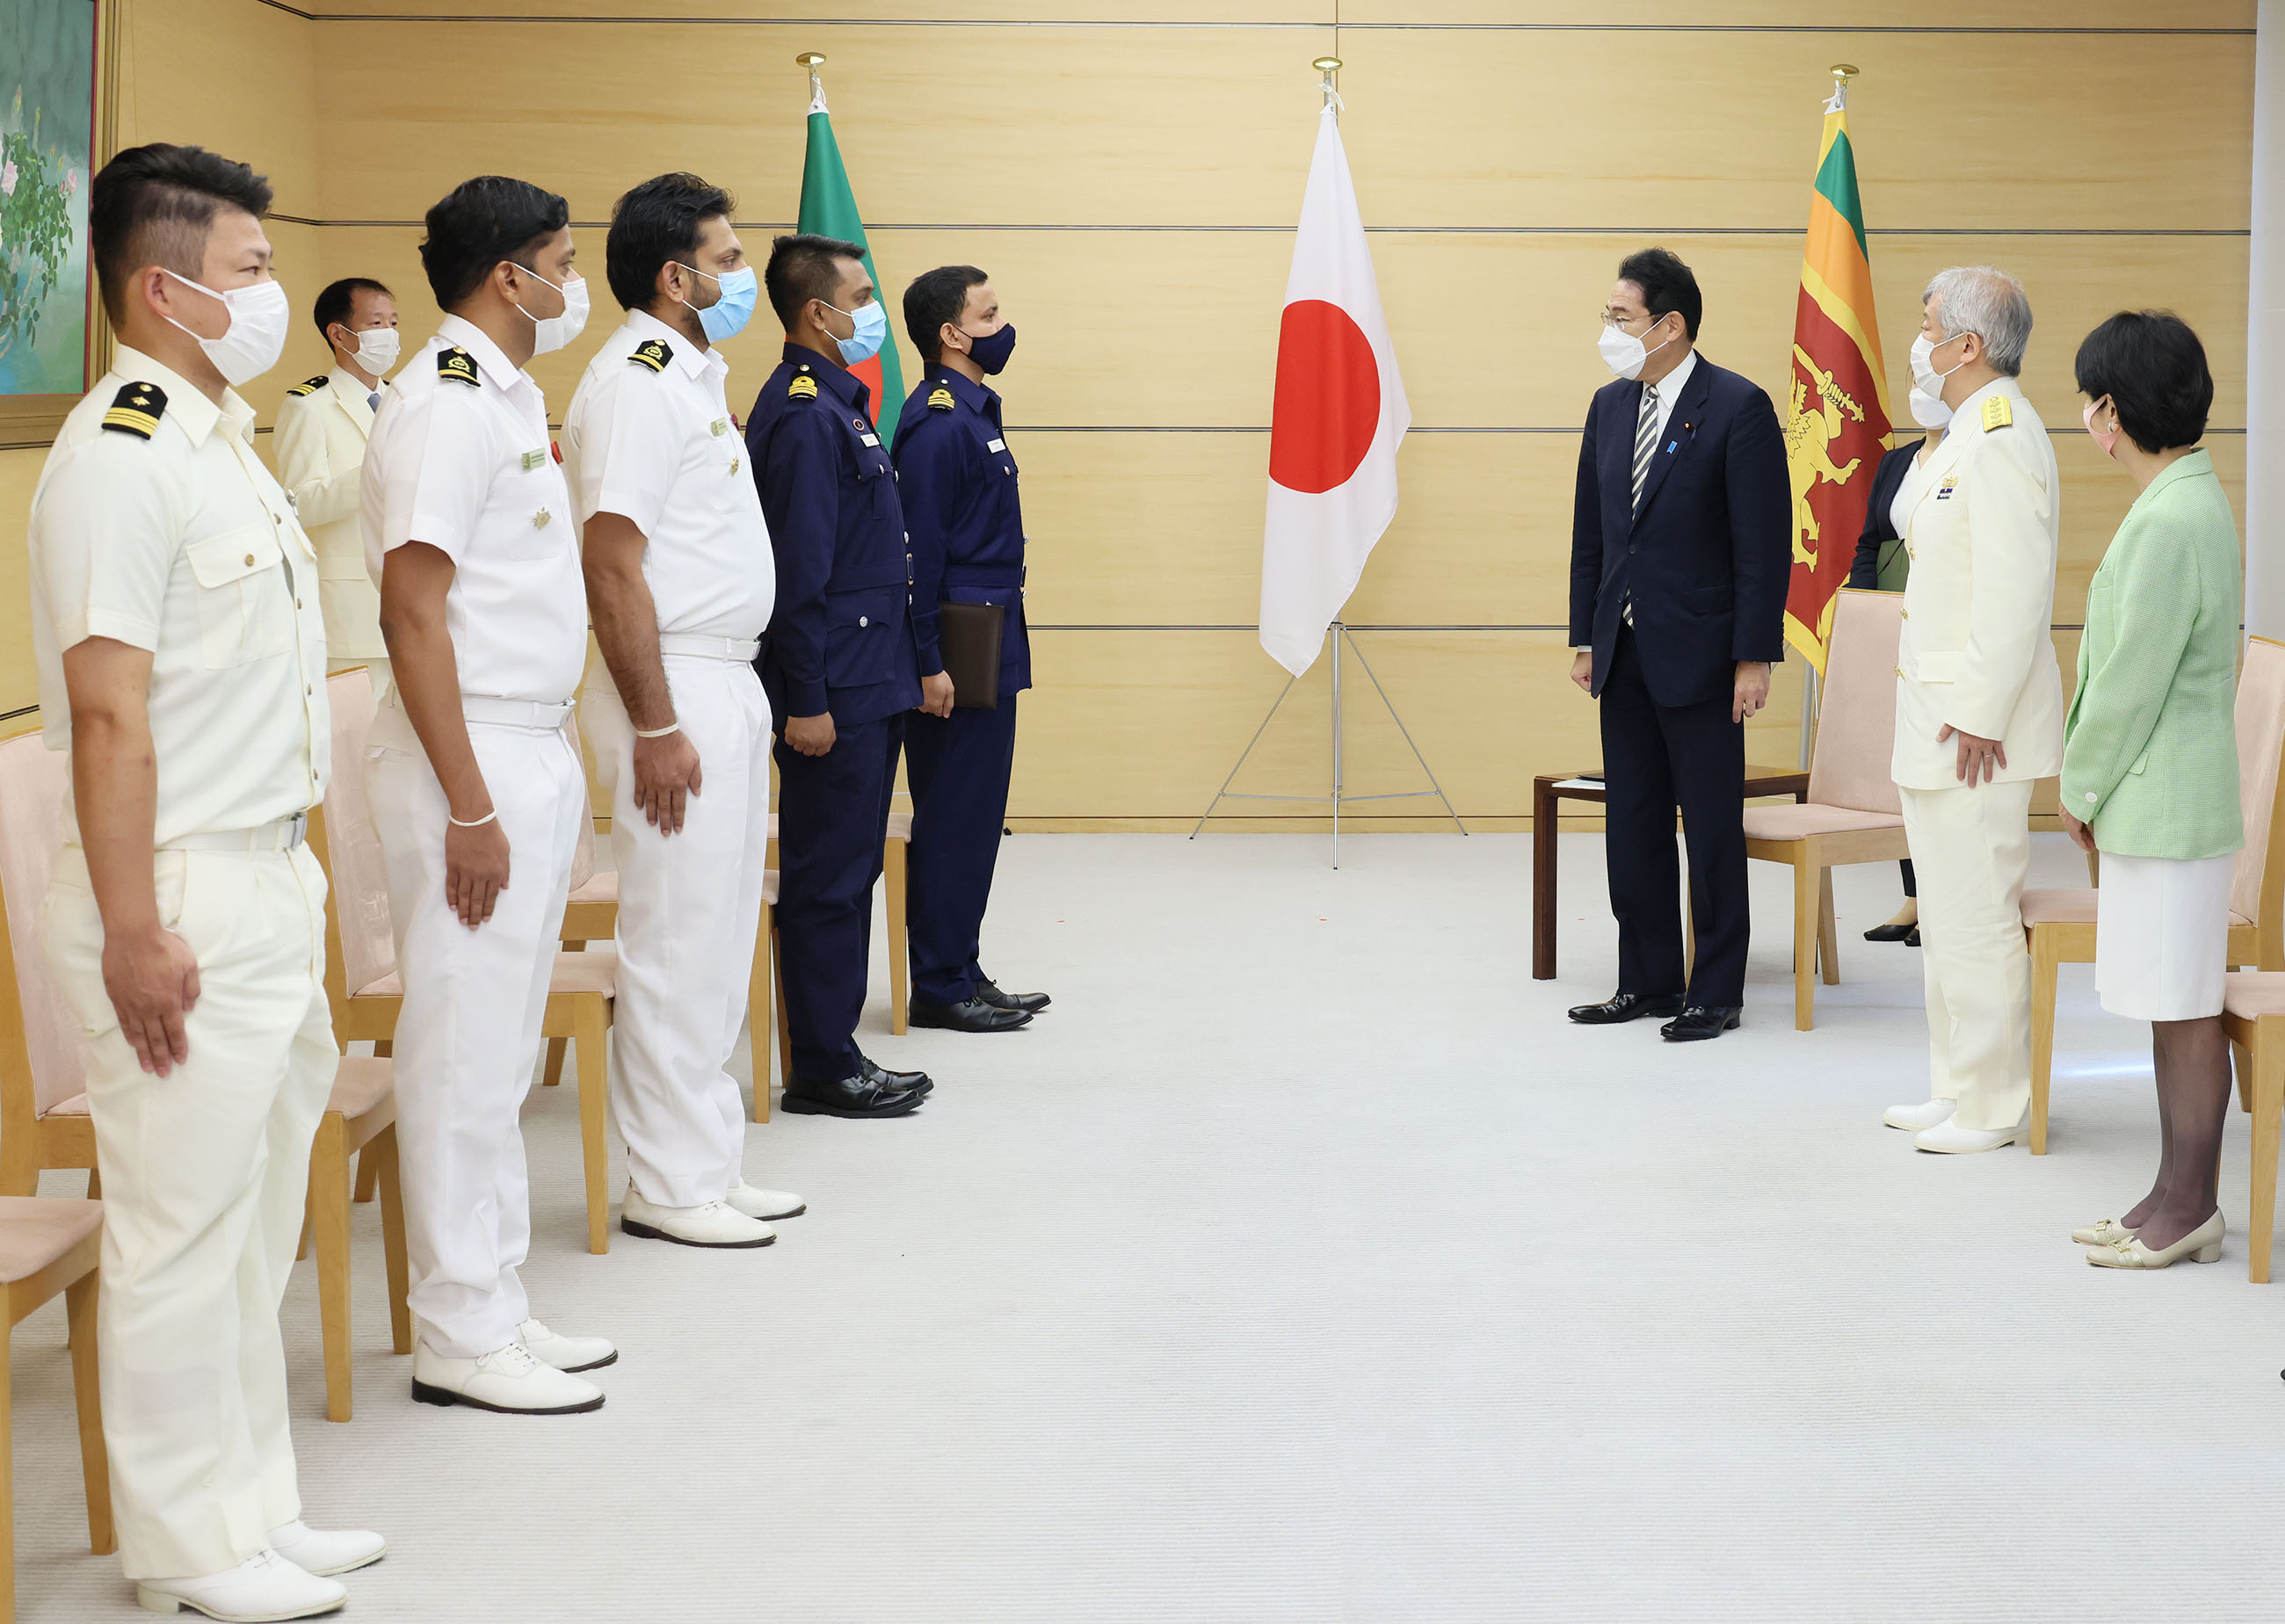 Courtesy Call from the Students of the Seventh Maritime Safety and Security Policy Program